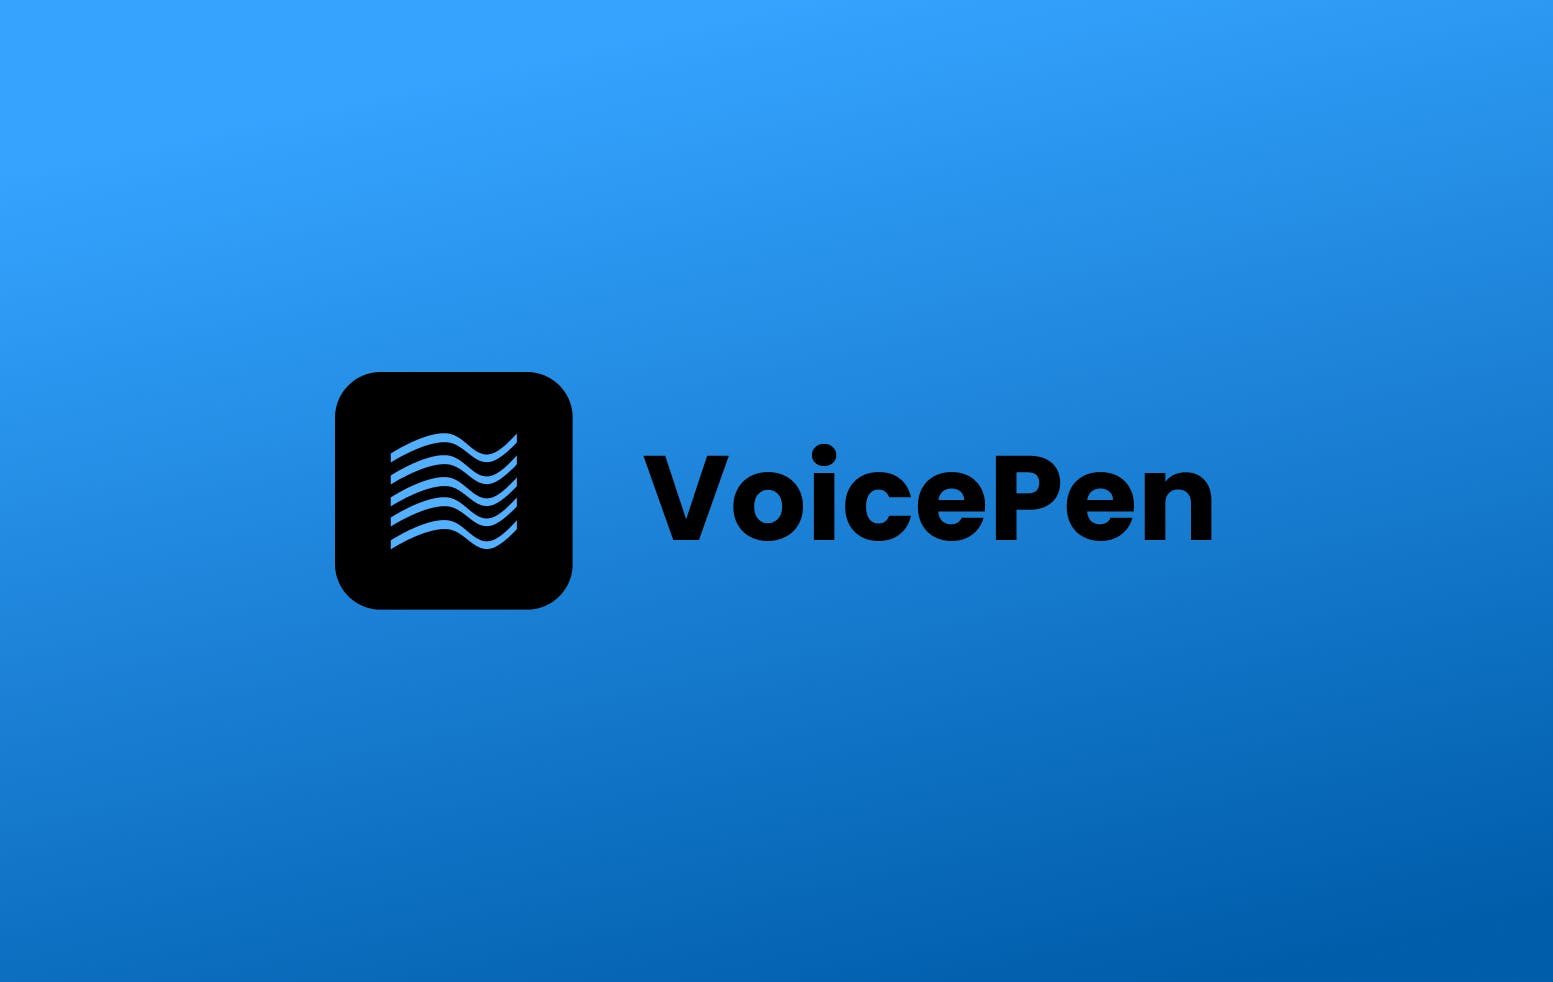 VoicePen - A tool to convert audio/video into blog posts and transcripts